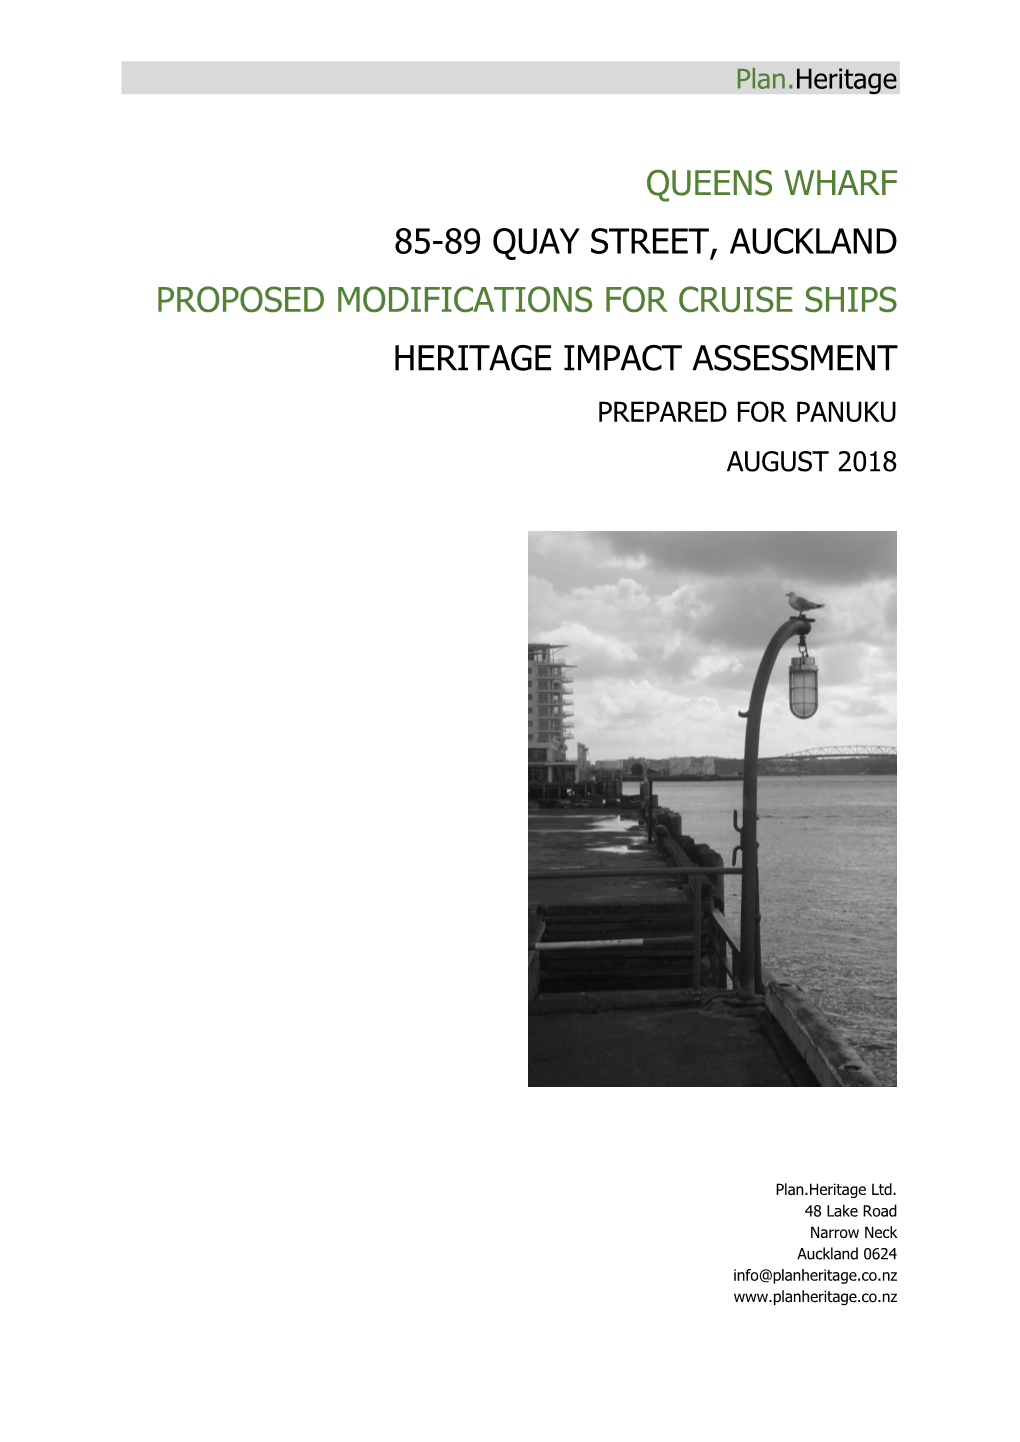 Queens Wharf 85-89 Quay Street, Auckland Proposed Modifications for Cruise Ships Heritage Impact Assessment Prepared for Panuku August 2018